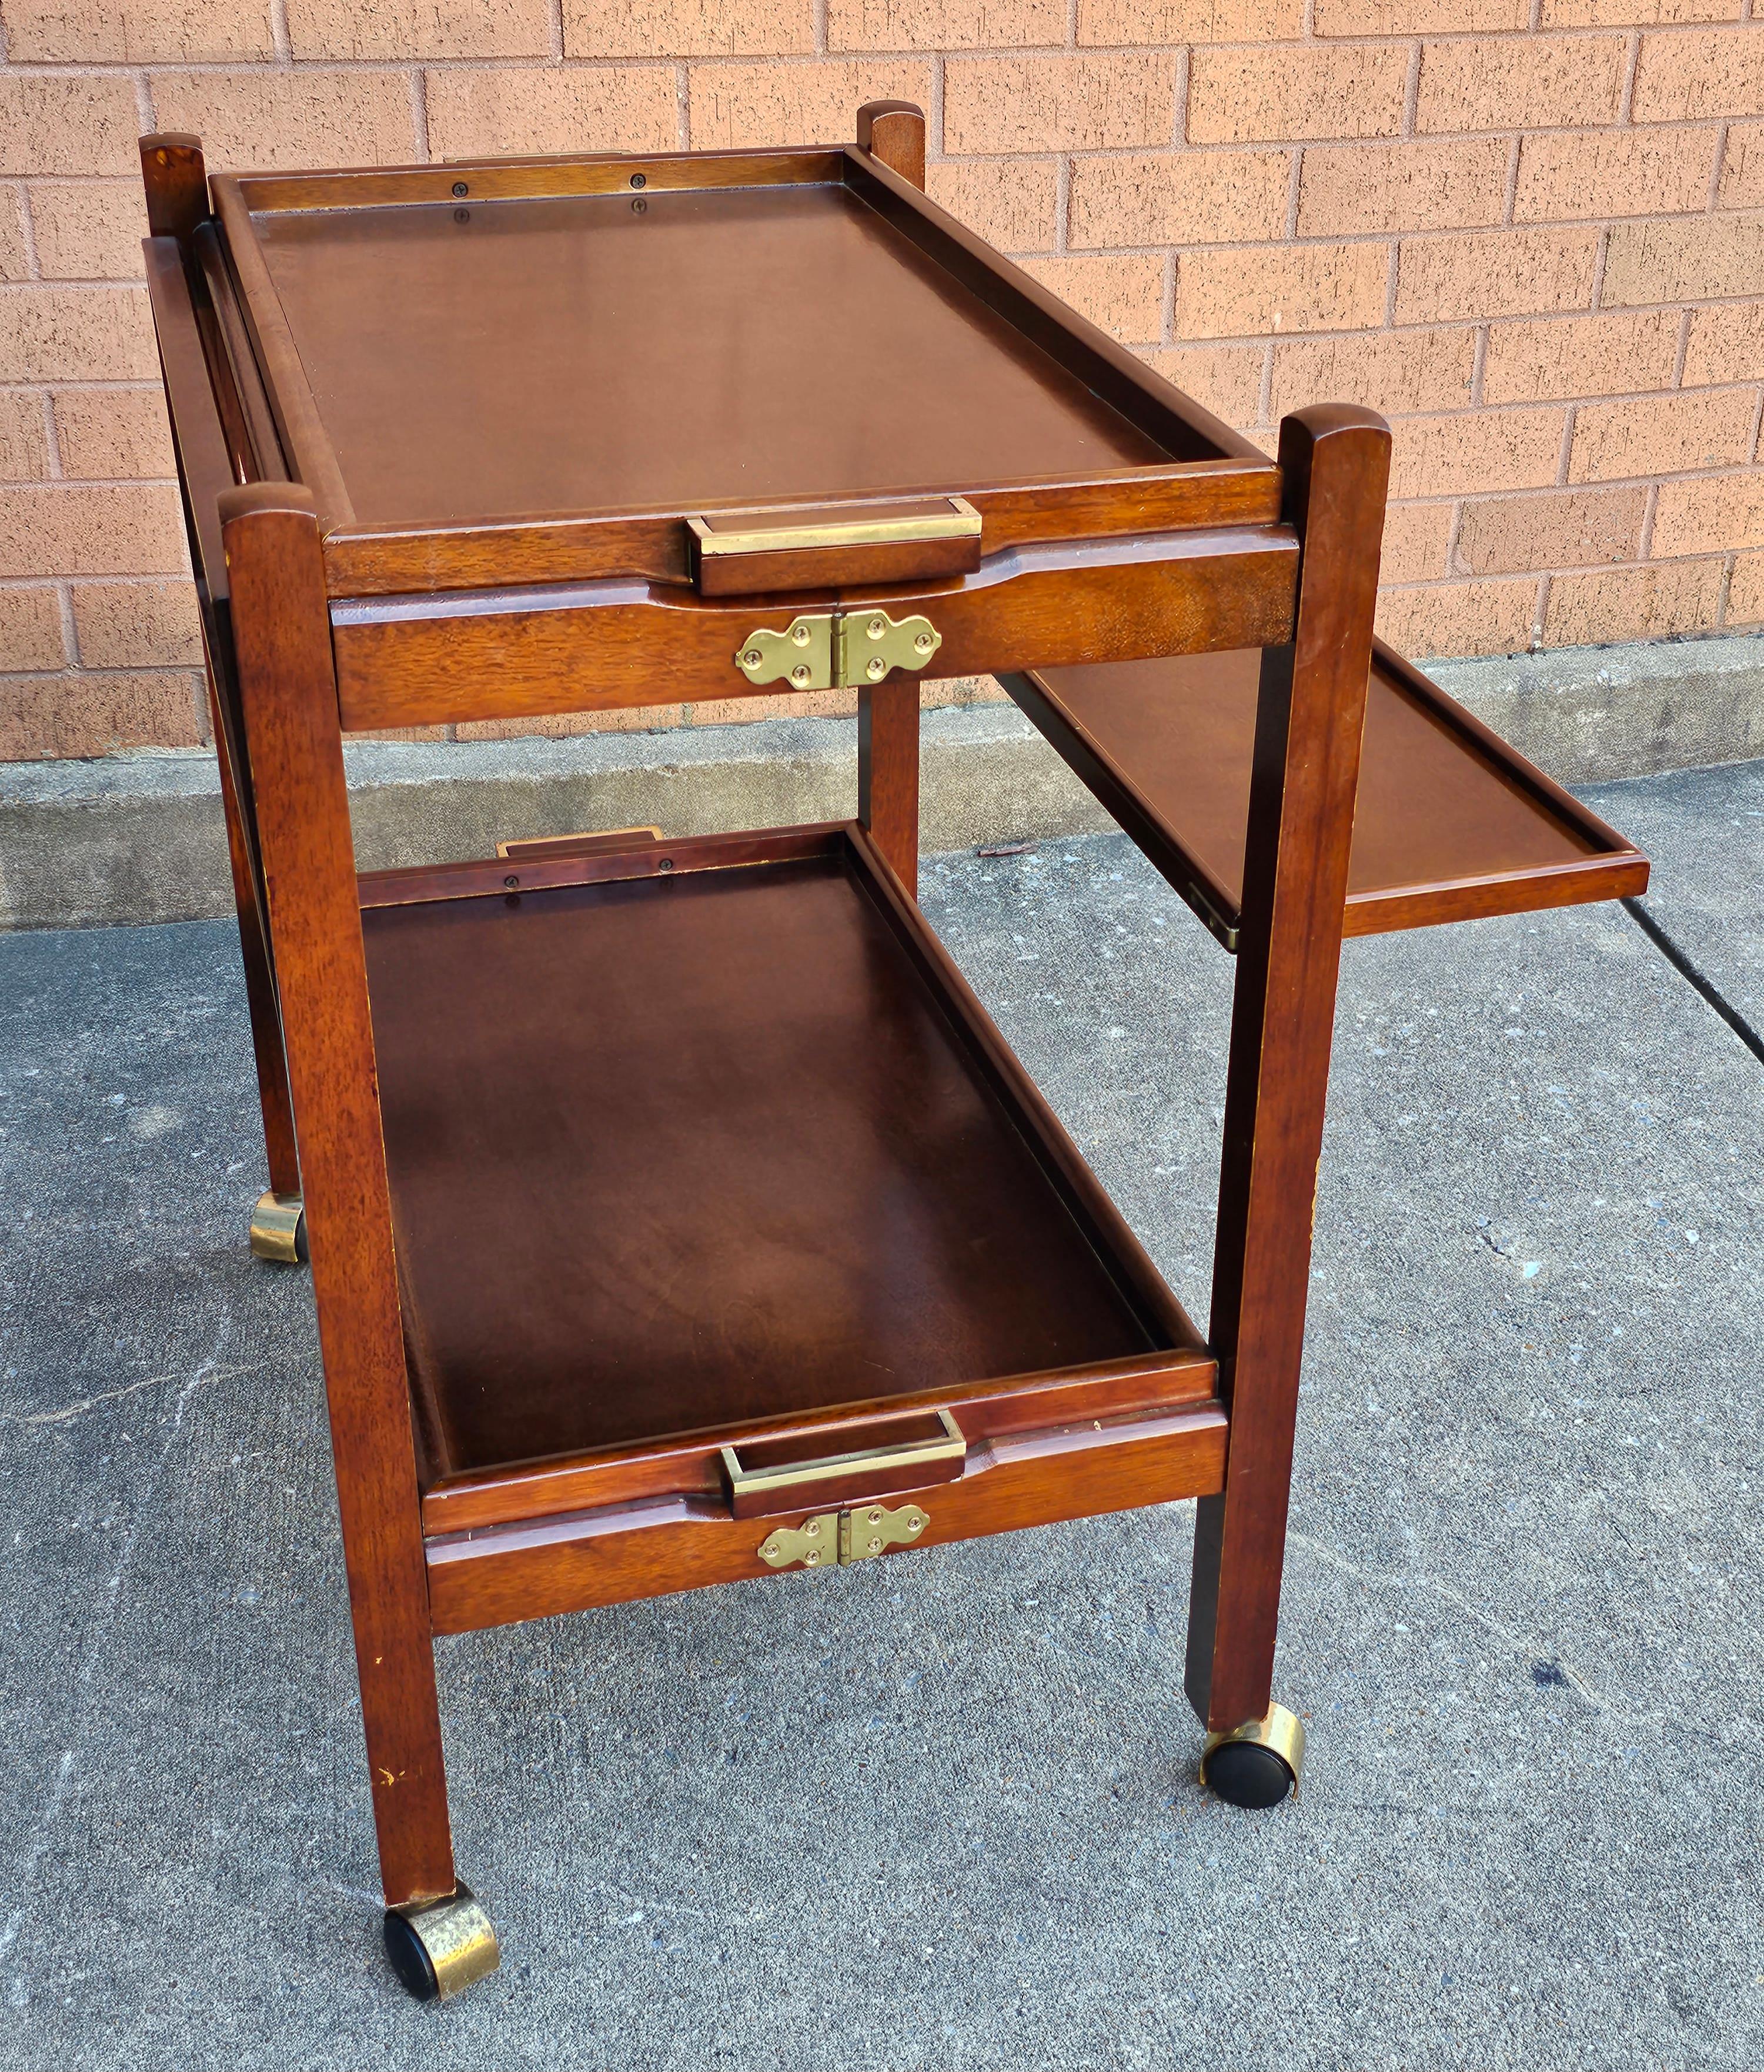 20th Century Scandinavian Modern Style Two-Tier Fold-Up Rolling Bar Cart with Removable Trays For Sale